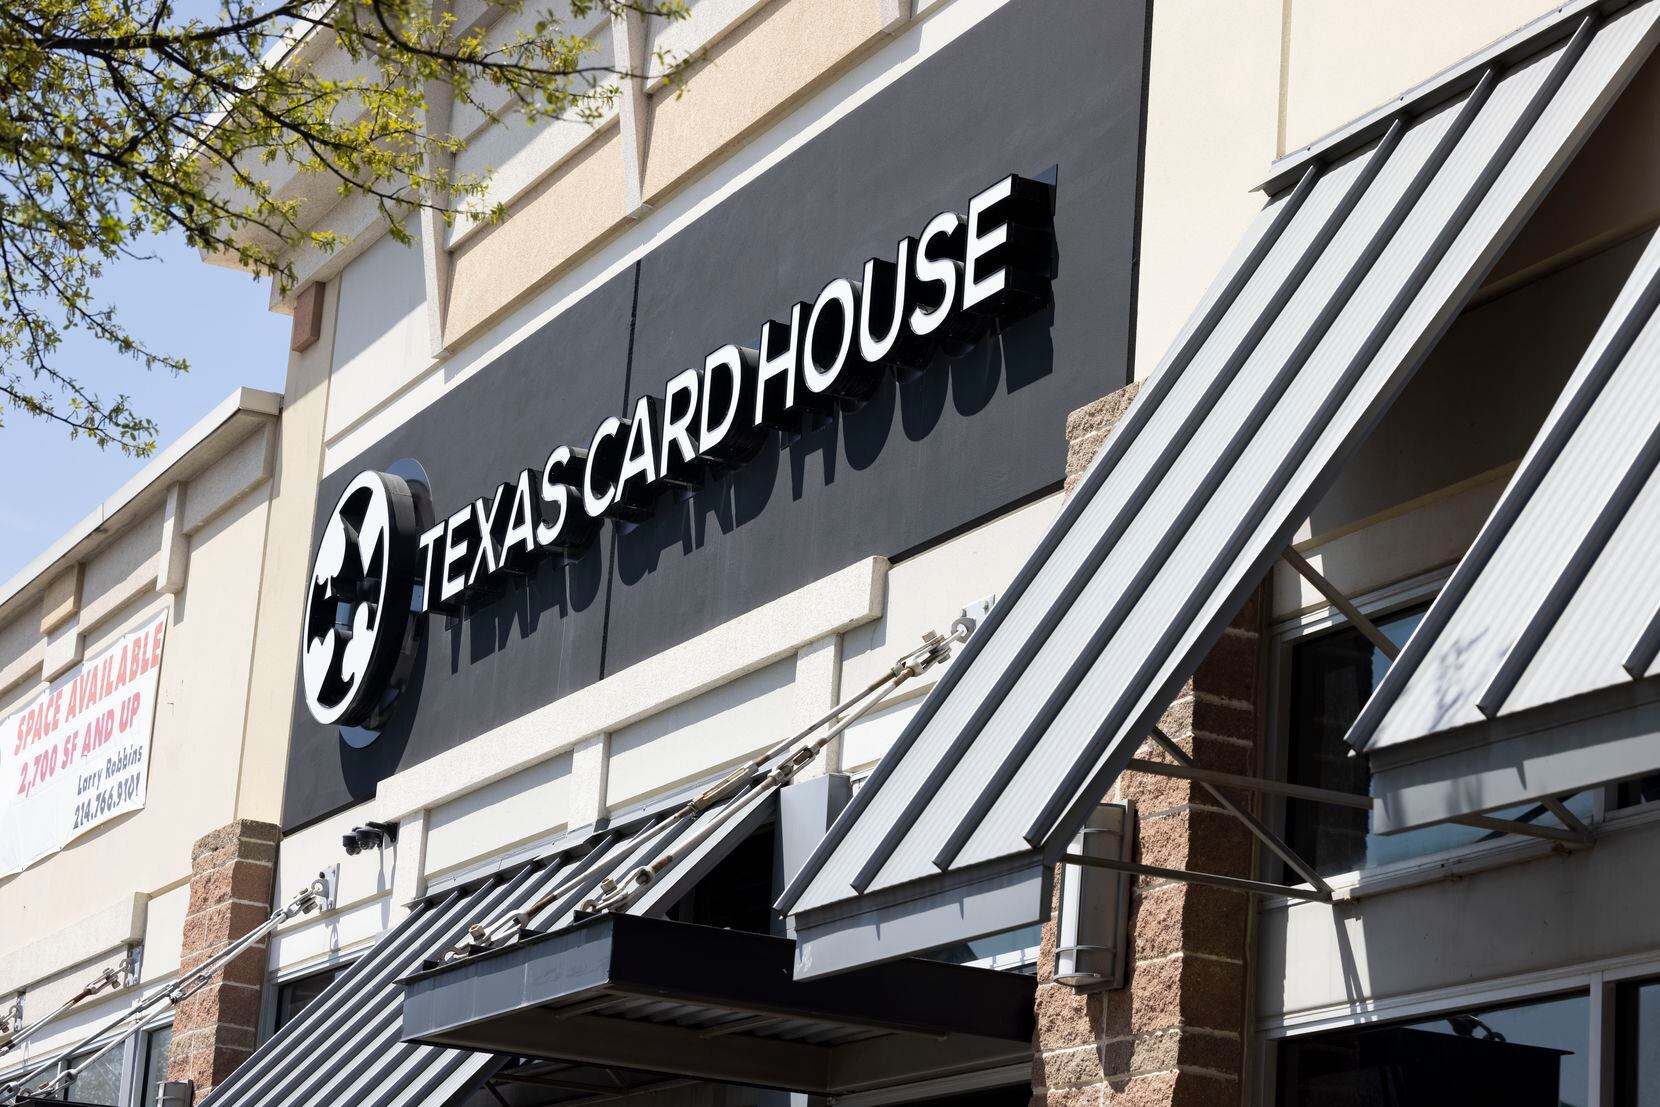 Texas Card House in northwest Dallas is one of the businesses whose license the city is...